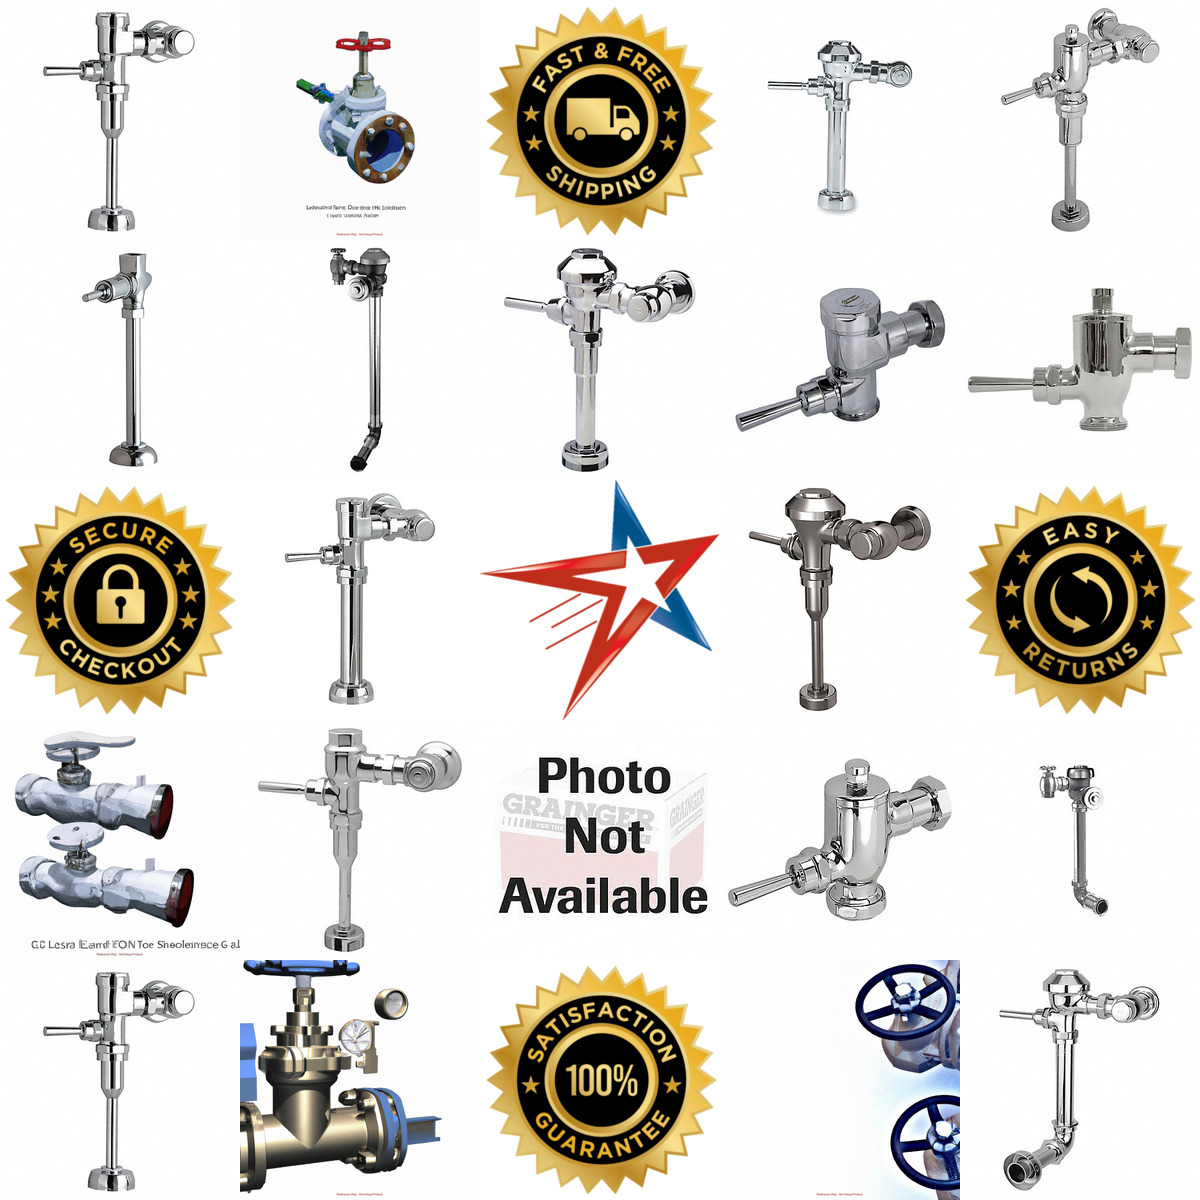 A selection of Manual Flush Valves products on GoVets